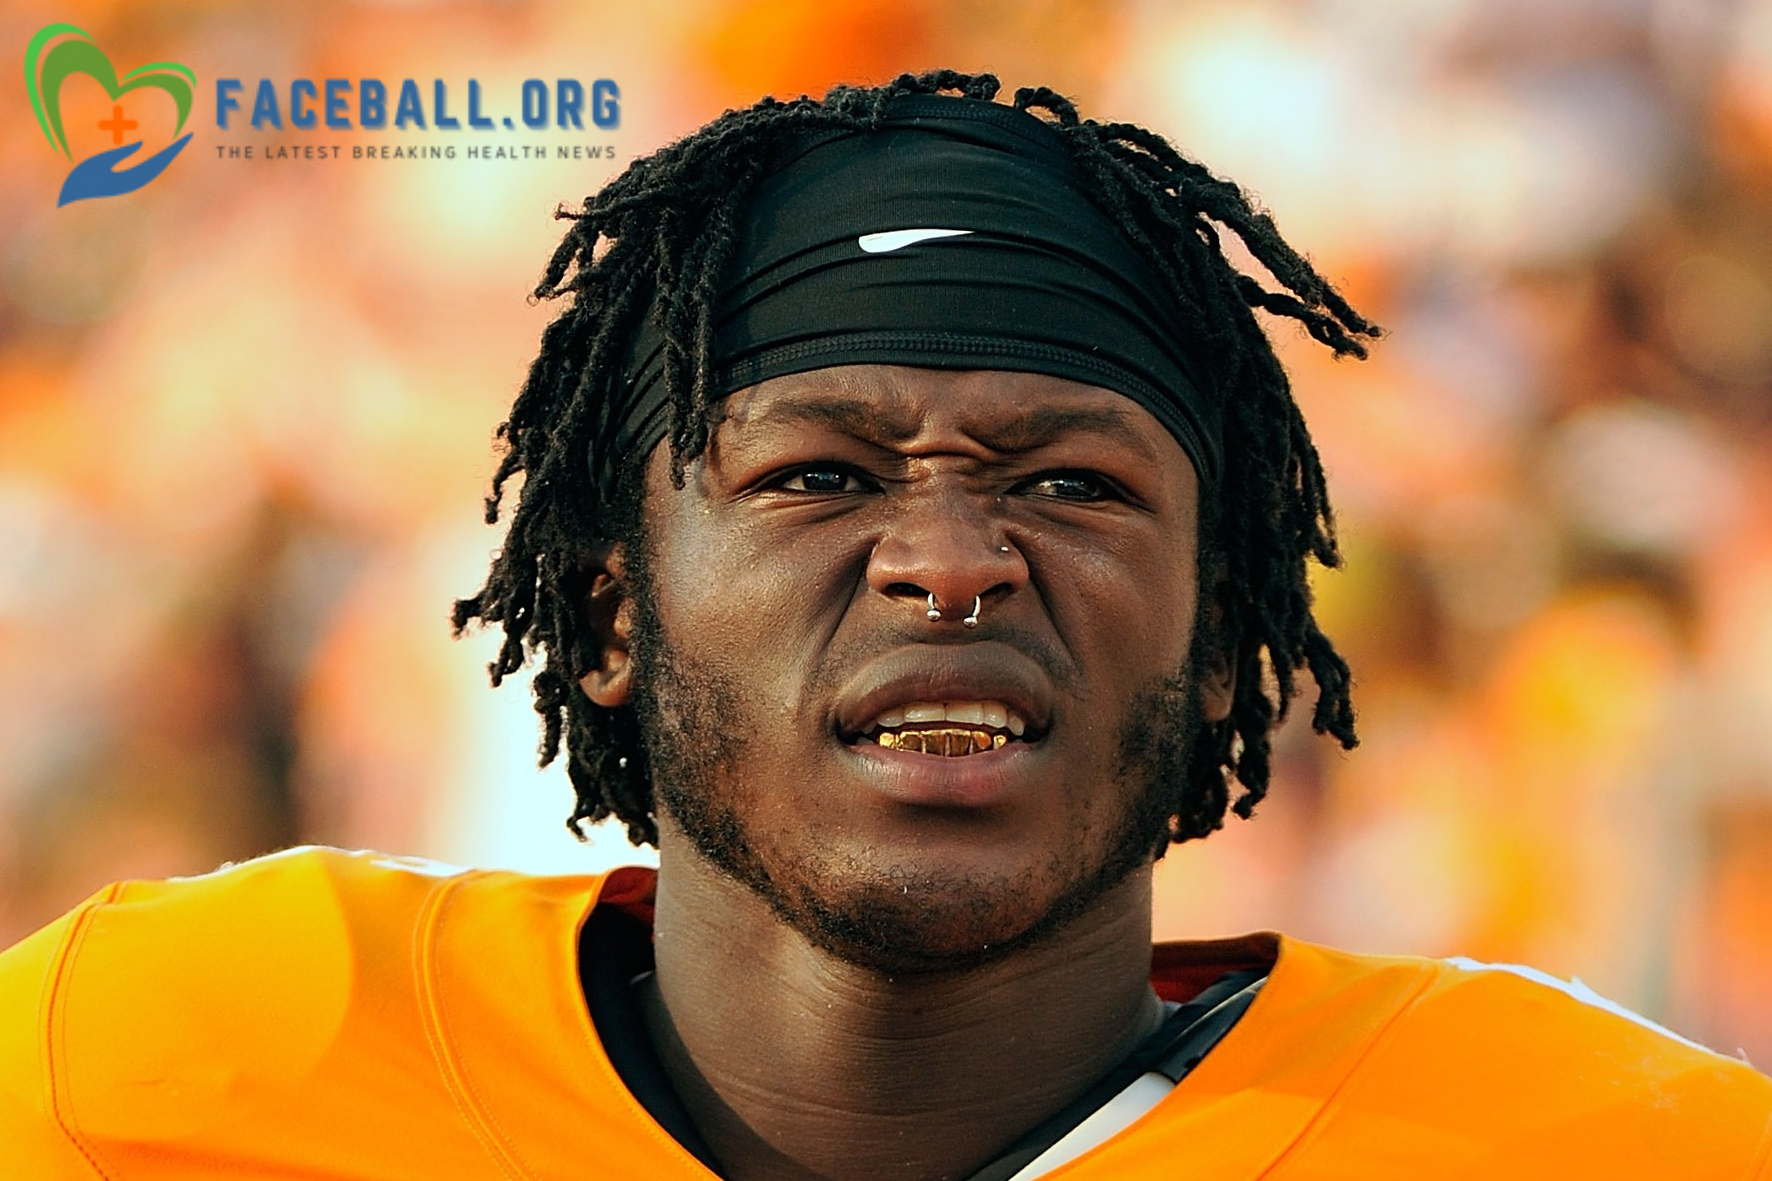 Alvin Kamara Net Worth 2022 How Much Money Is His Wealth? The NFL